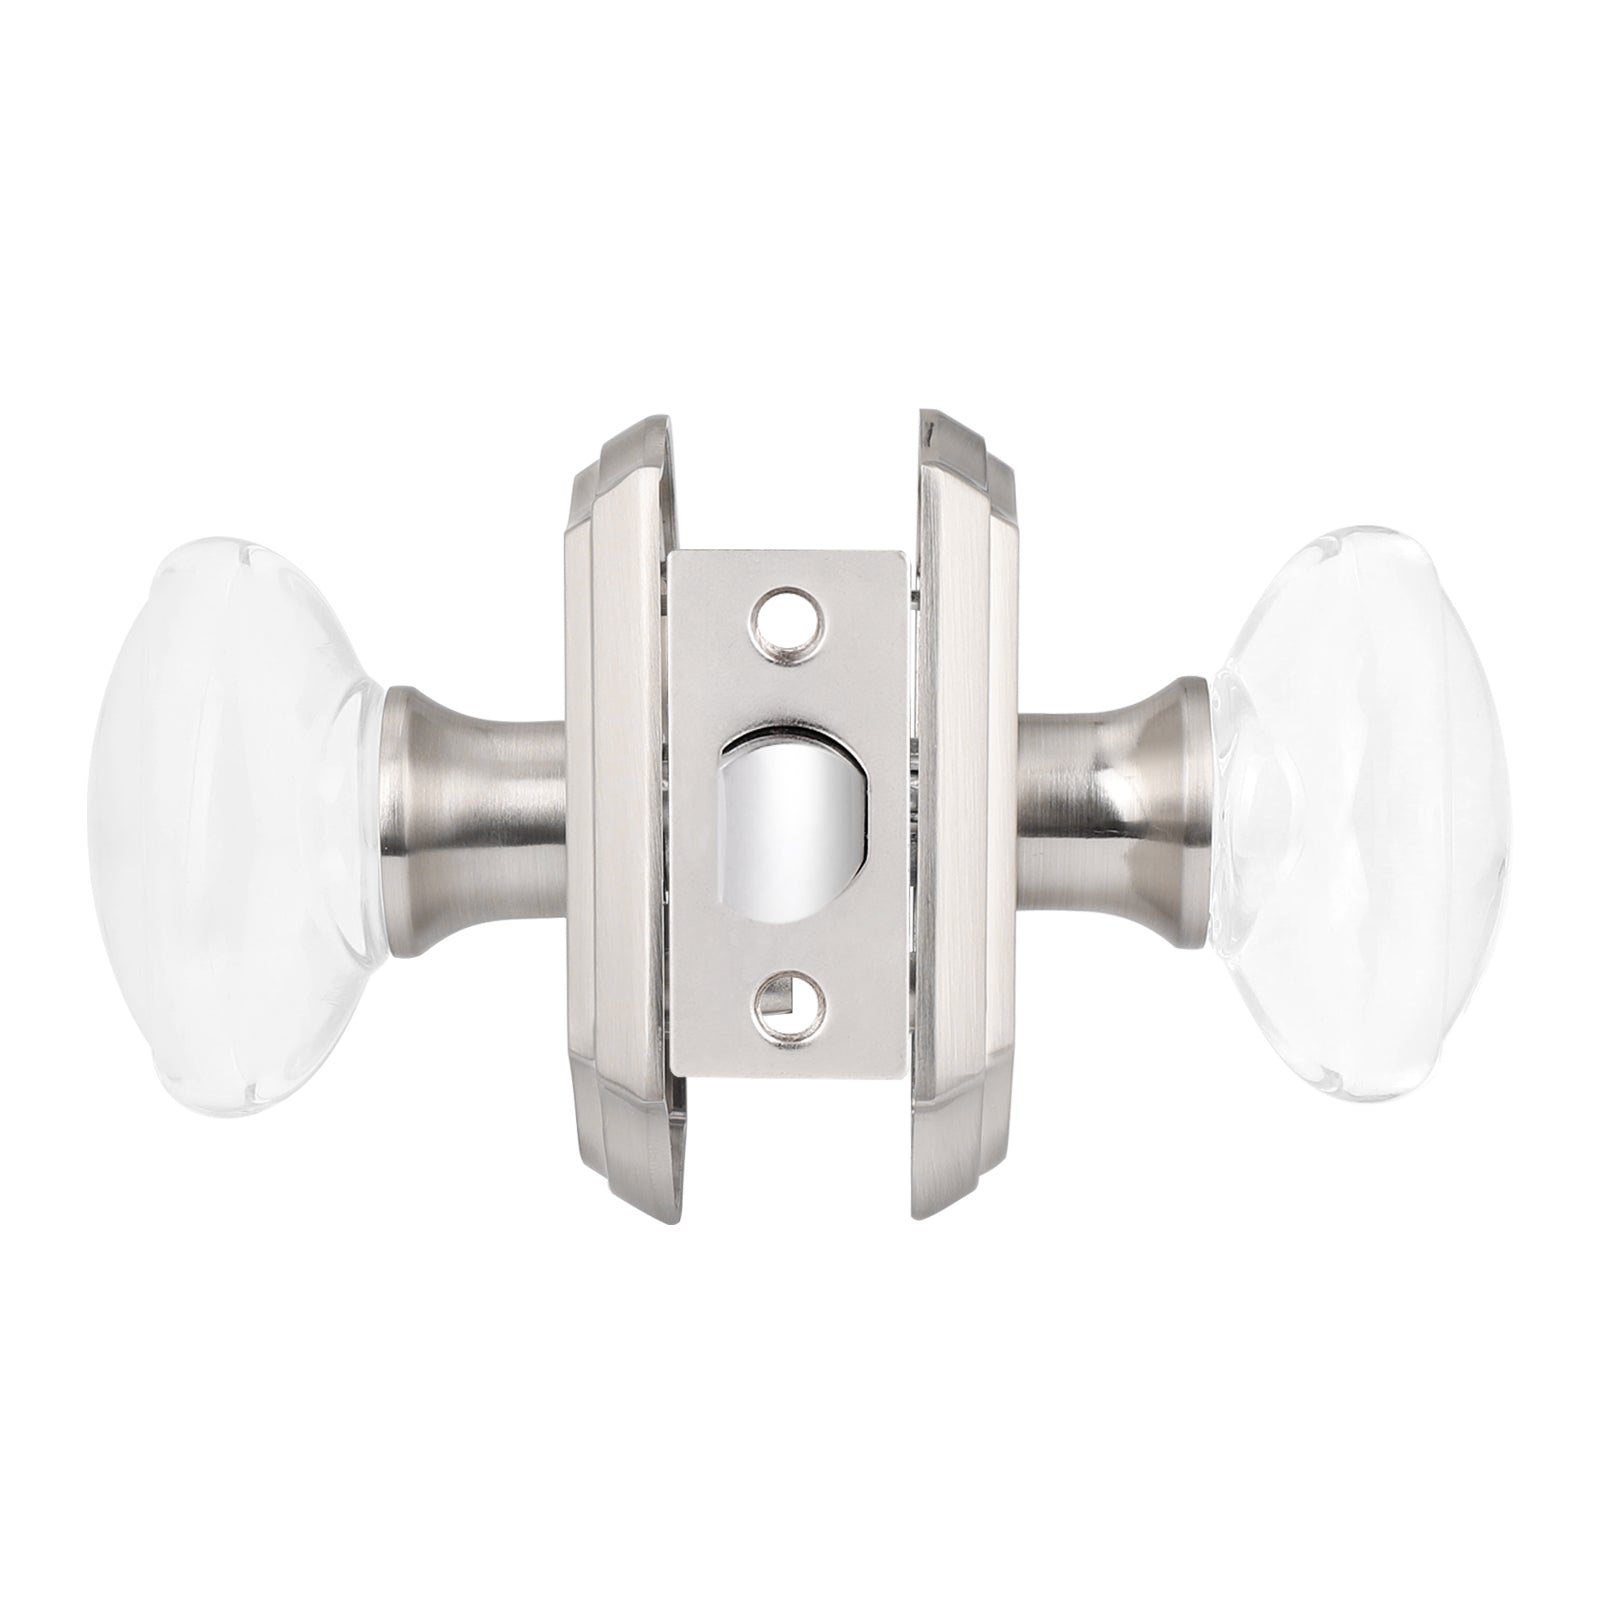 Oval Crystal Door Knob Lock with Satin Nickel Arched Rosette DLC9SN